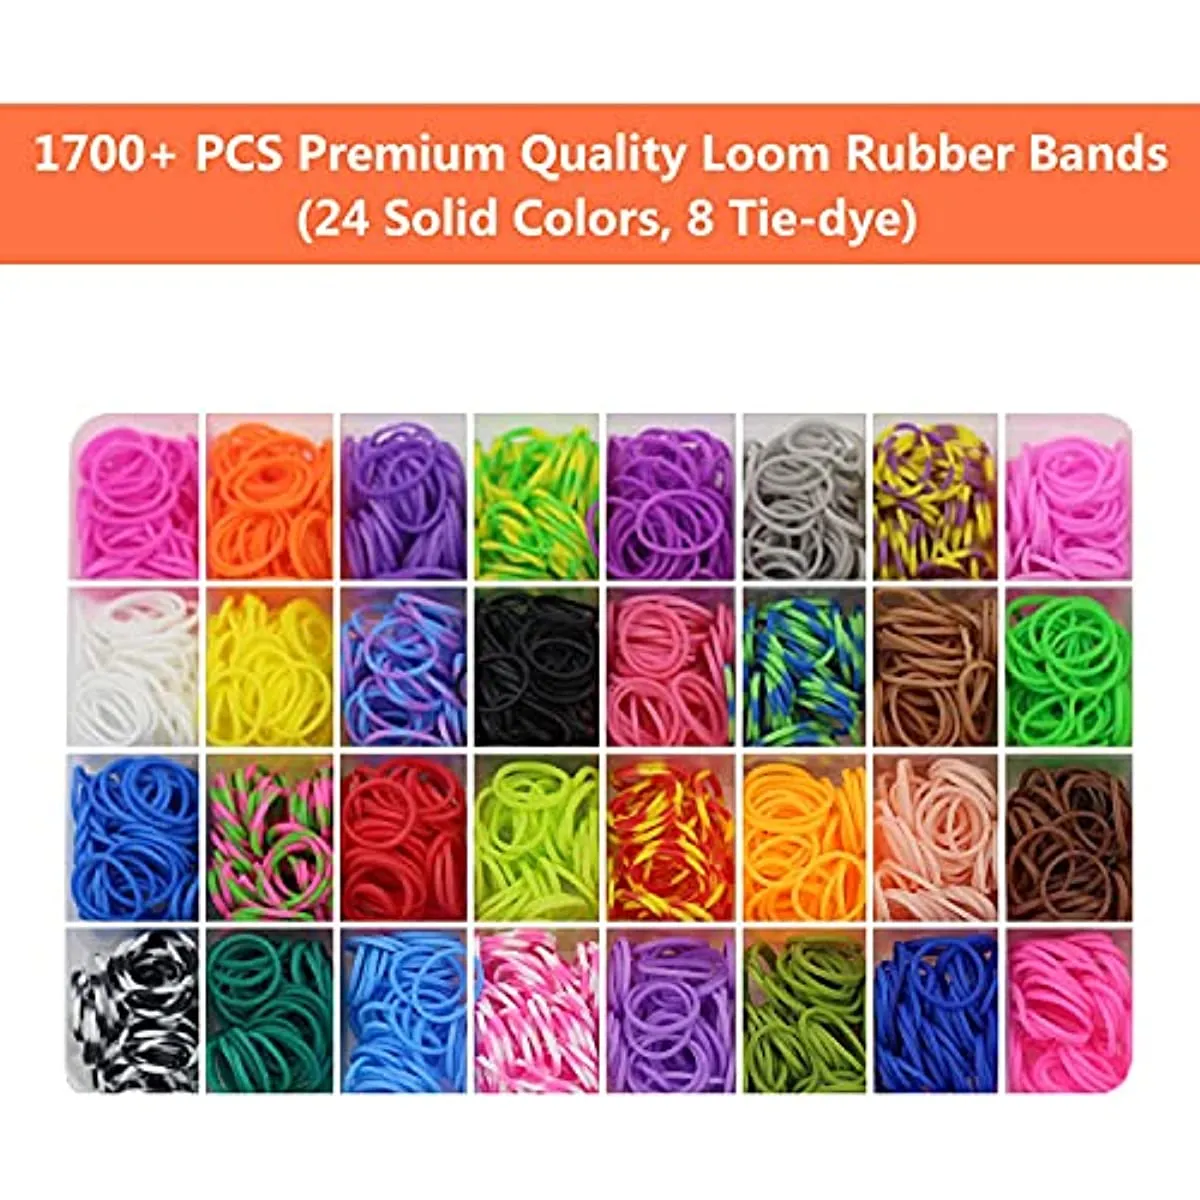 Premium Rubber Bracelet Refill Set Up Loom Bands Toys In 32 Variety Colors  For Kids Boys And Girls From Sxe_toys, $6.74